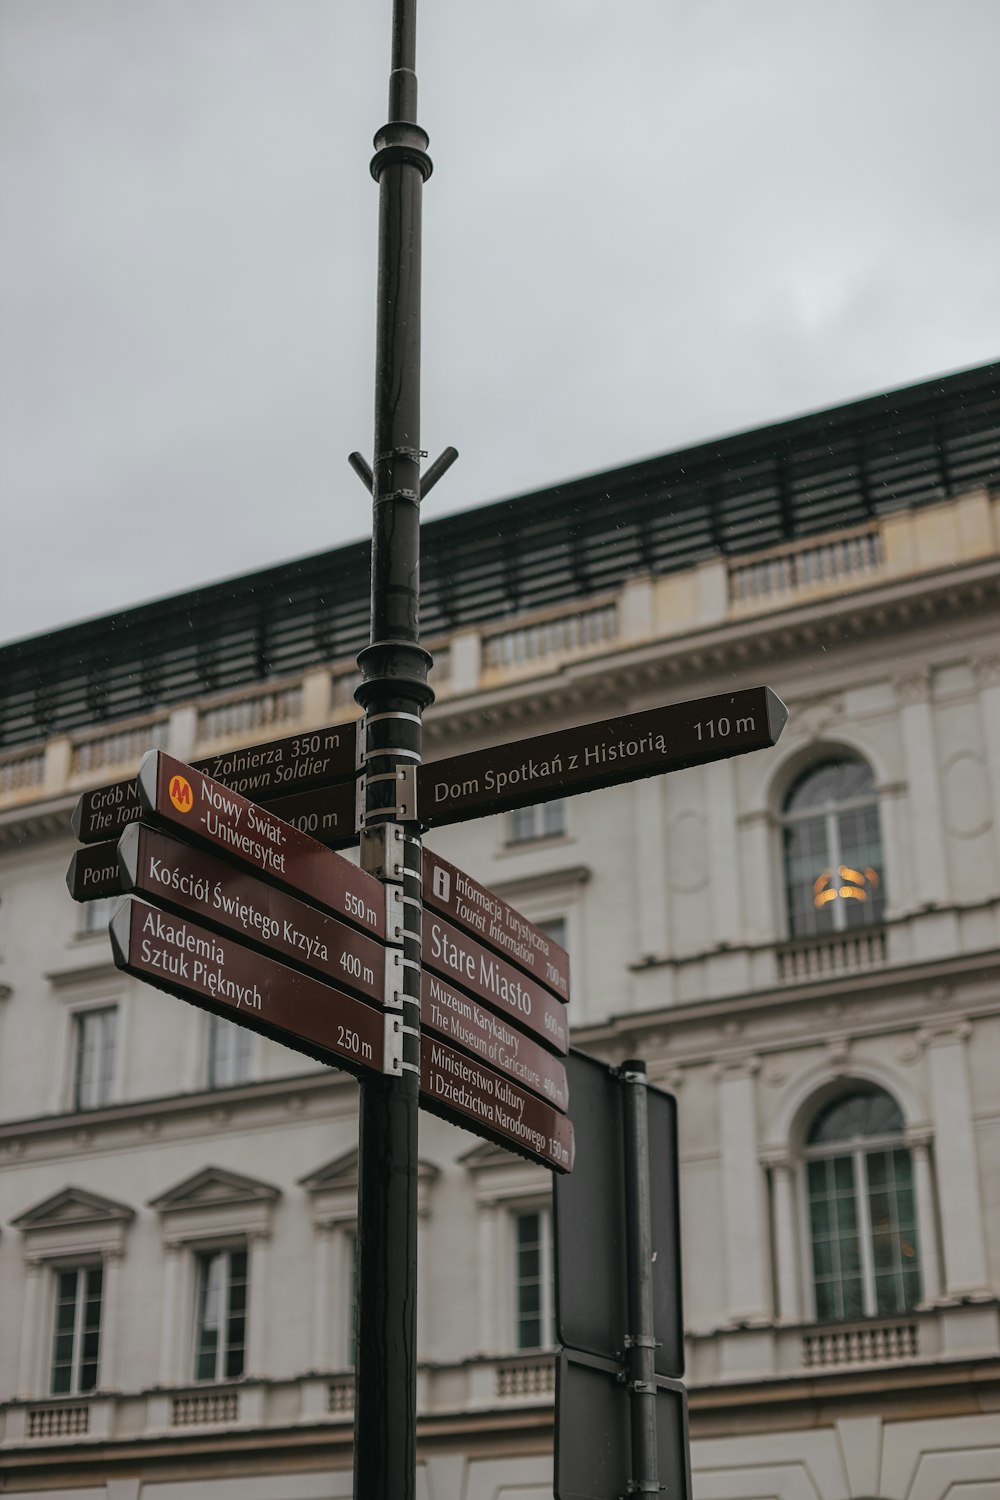 a street sign with several street signs